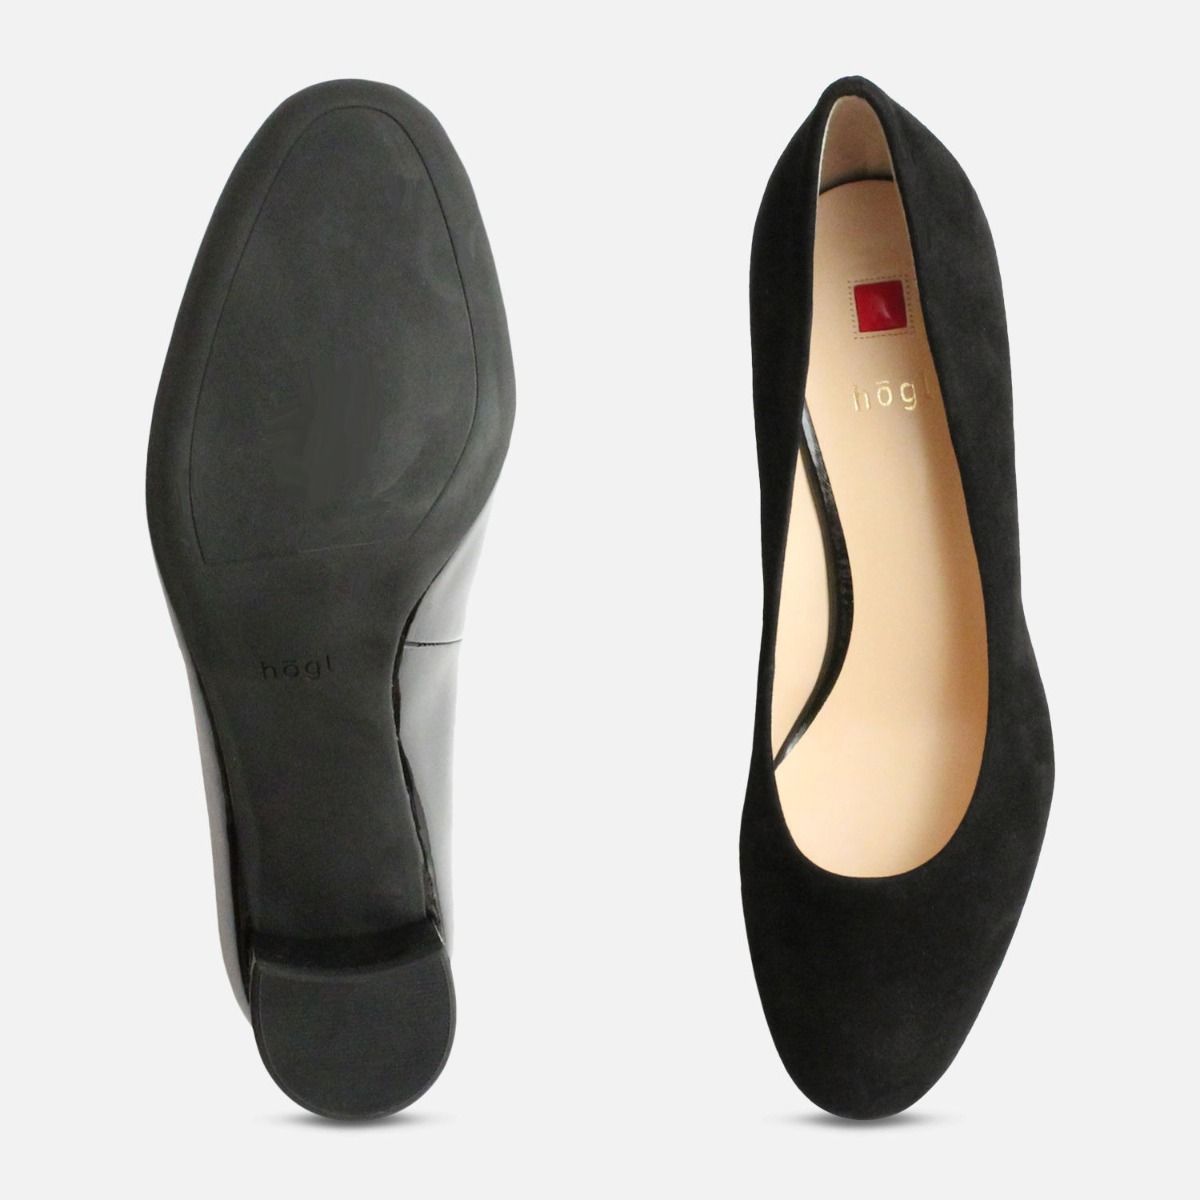 black suede shoes for ladies